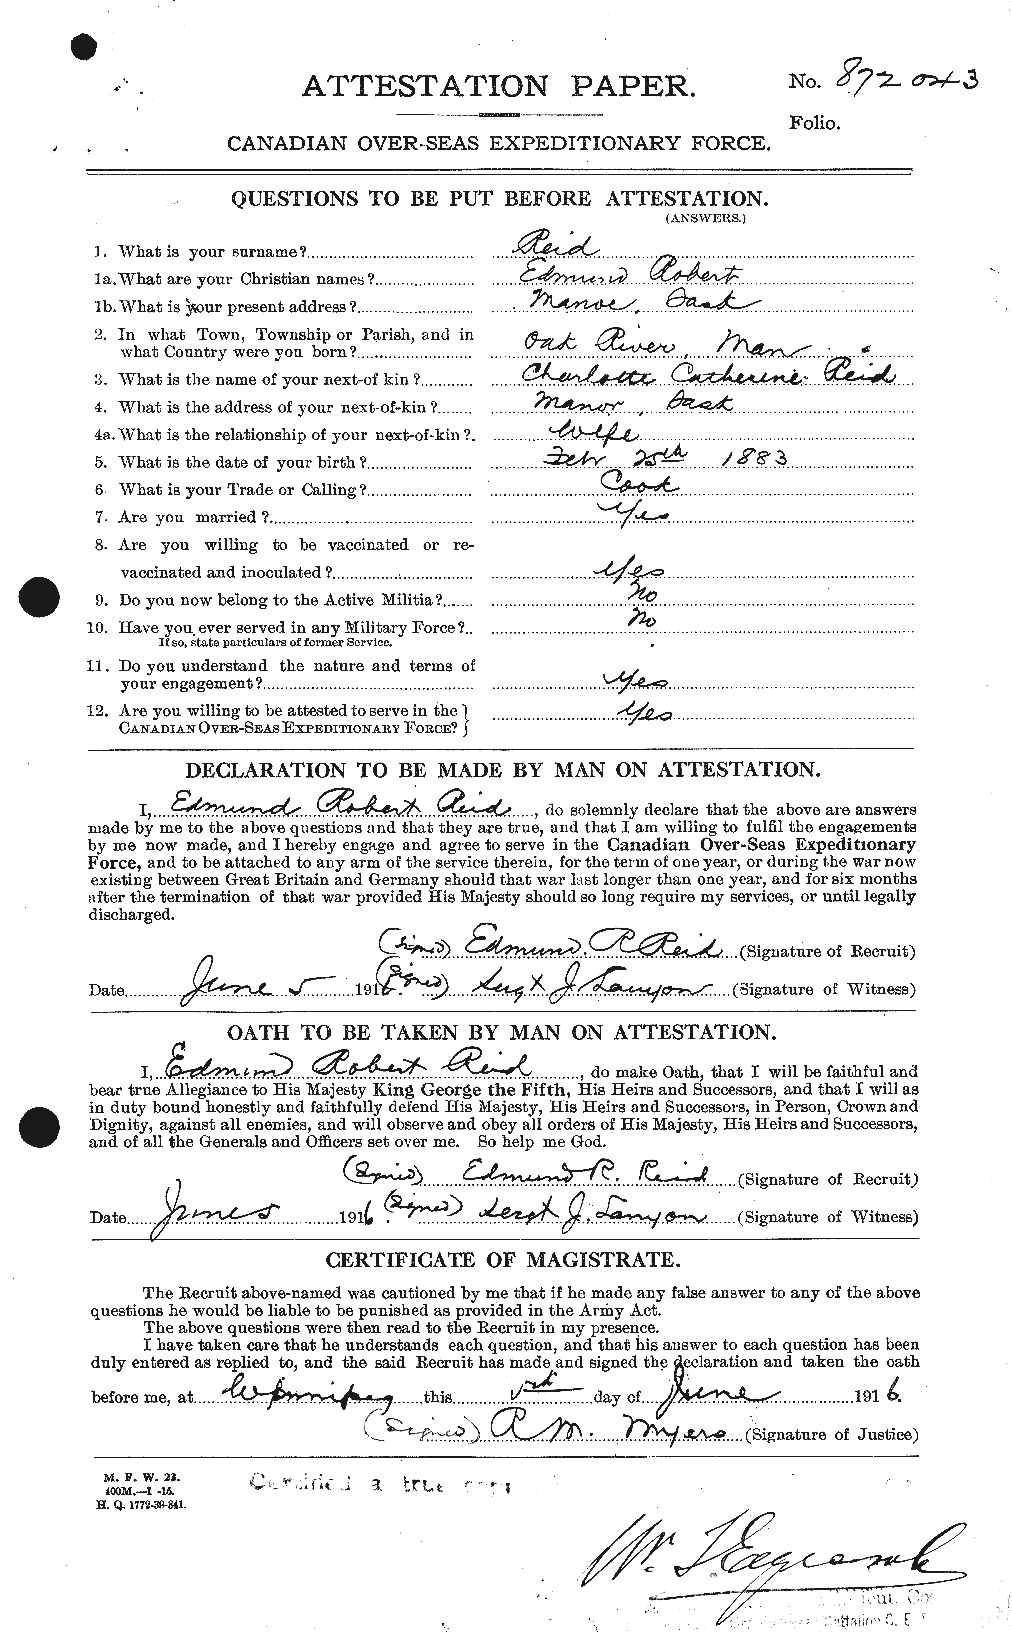 Personnel Records of the First World War - CEF 597981a